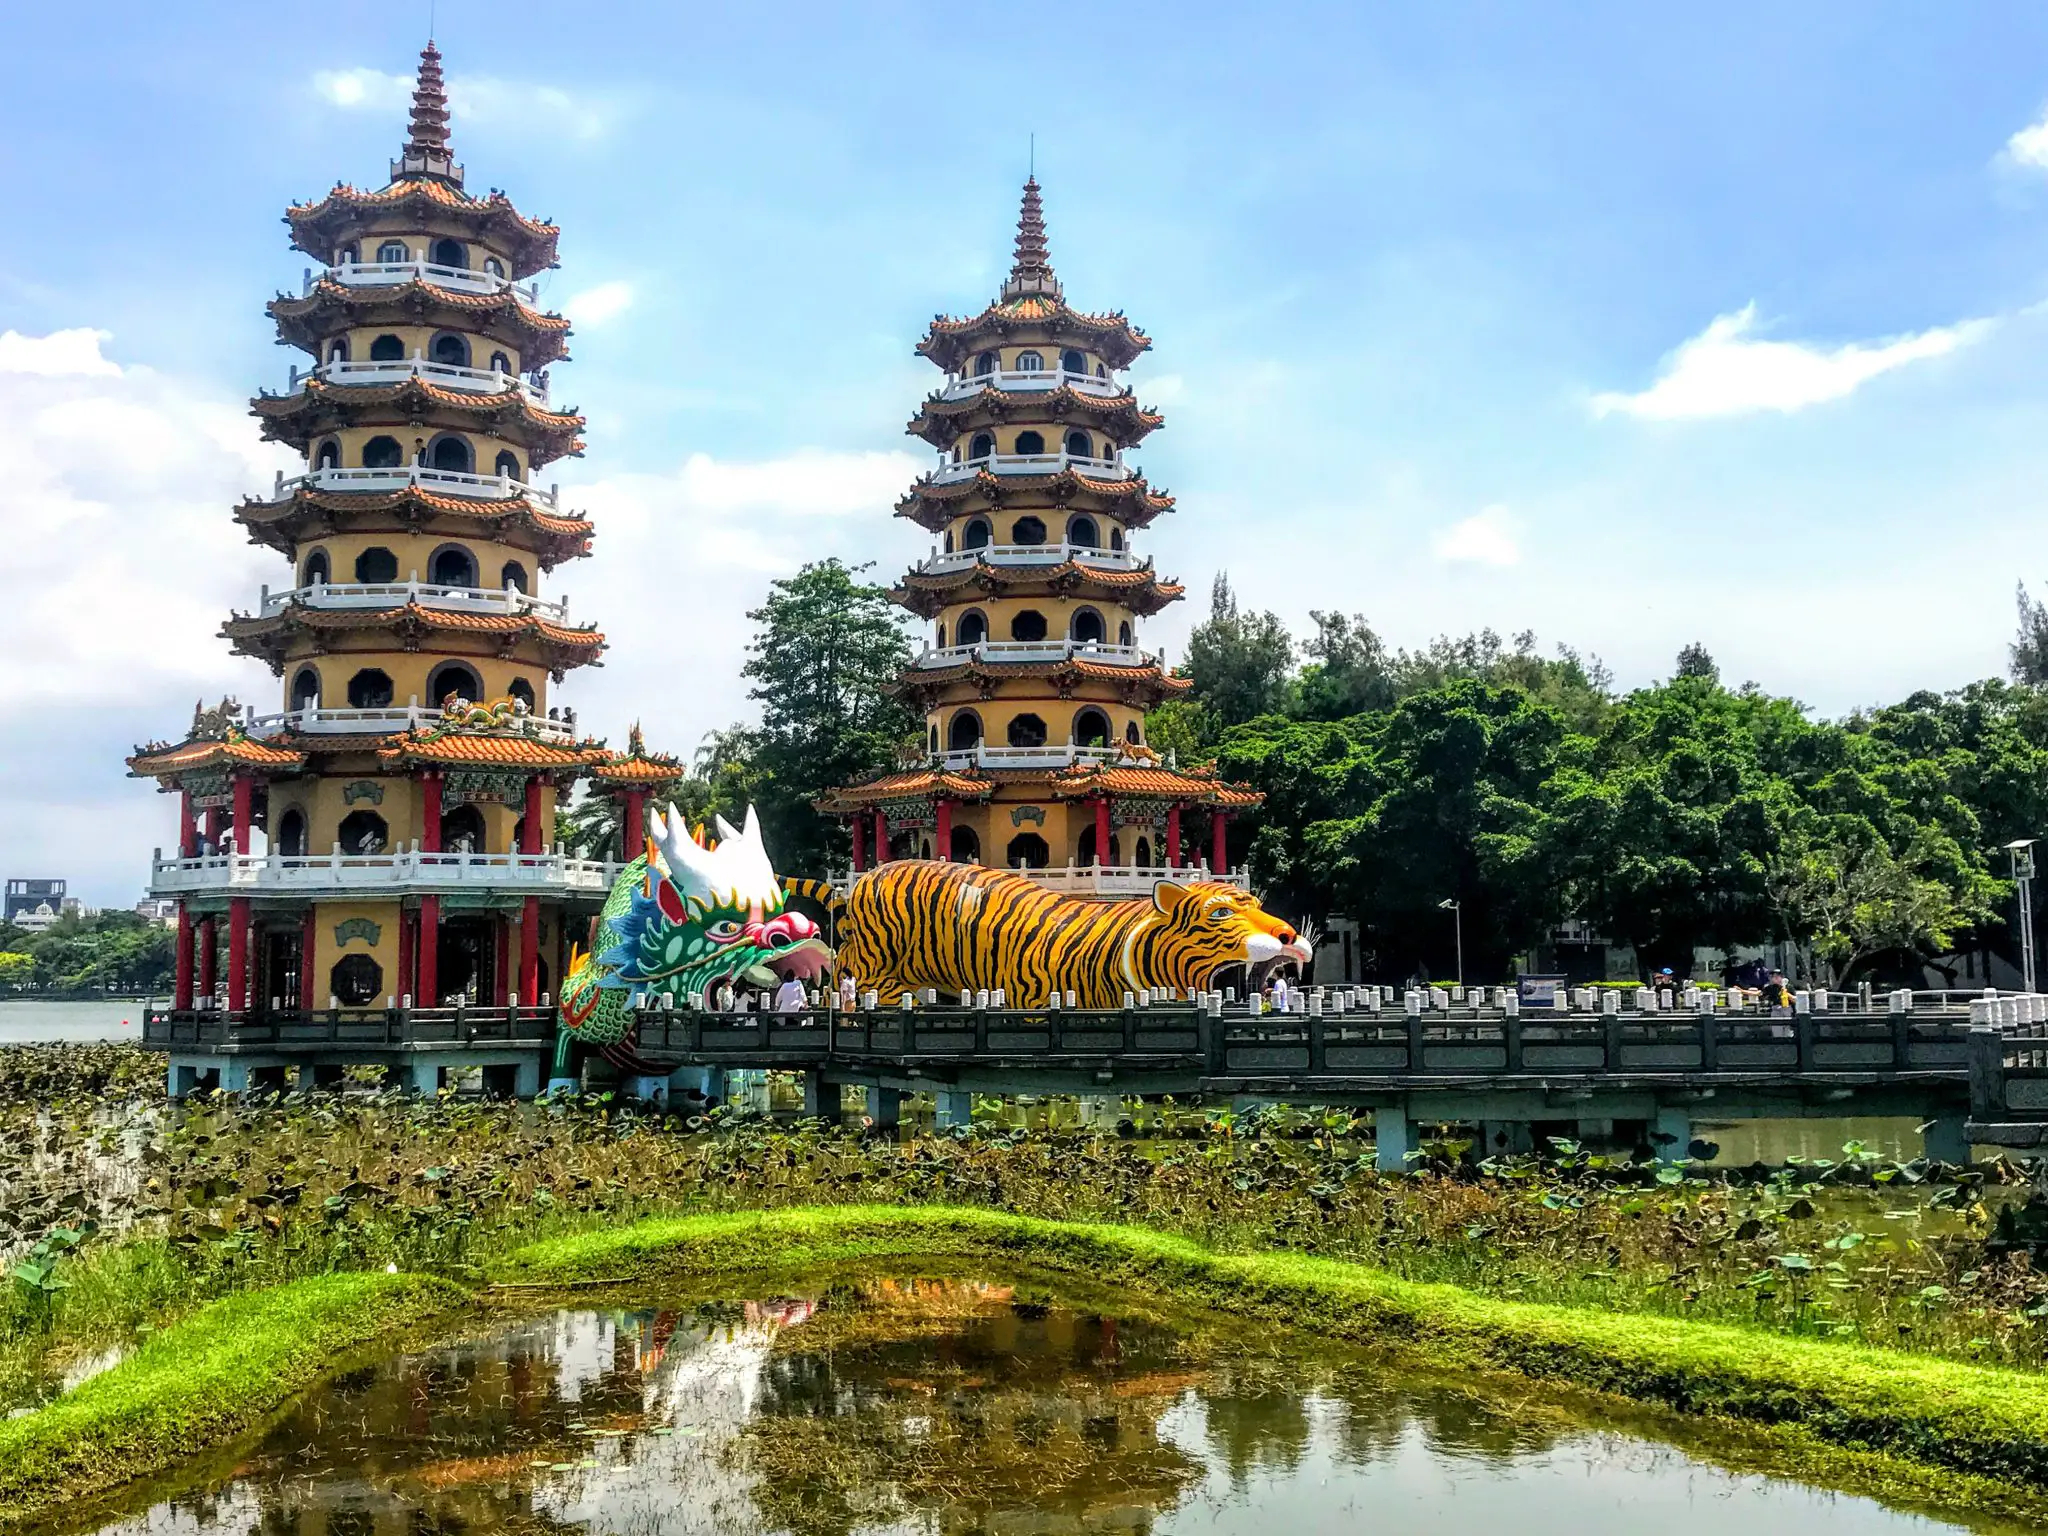 Dragon and Tiger temple in Lotus Pond, Kaohsiung, Taiwan